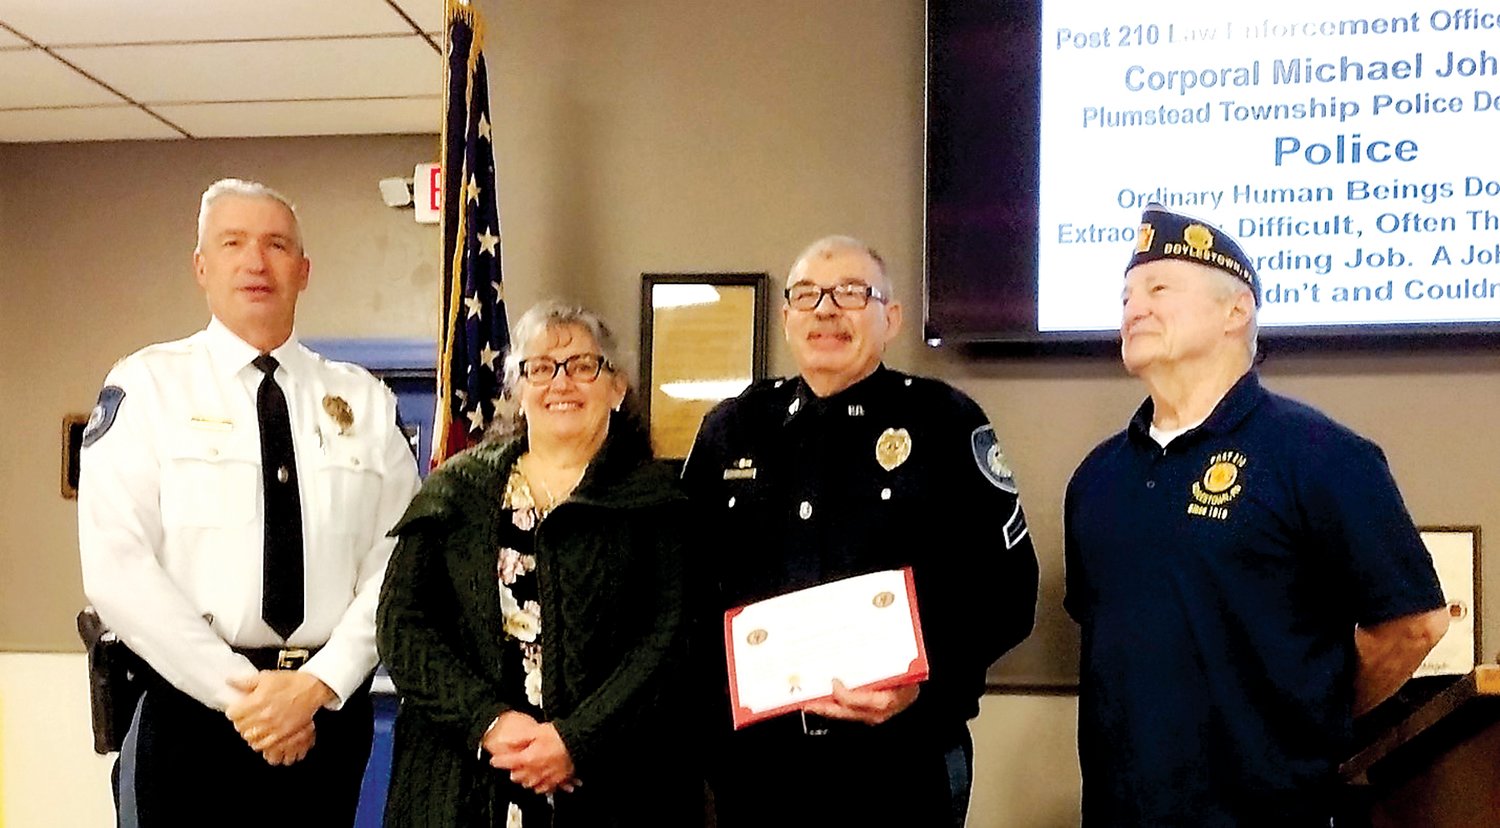 From left are: Chief David Mettin, Plumstead Police Department; Roseanne Johnson, wife of Cpl. Michael Johnson; Cpl. Michael Johnson, Plumstead Police Department; and American Legion Post 210 Commander Pete Scott.